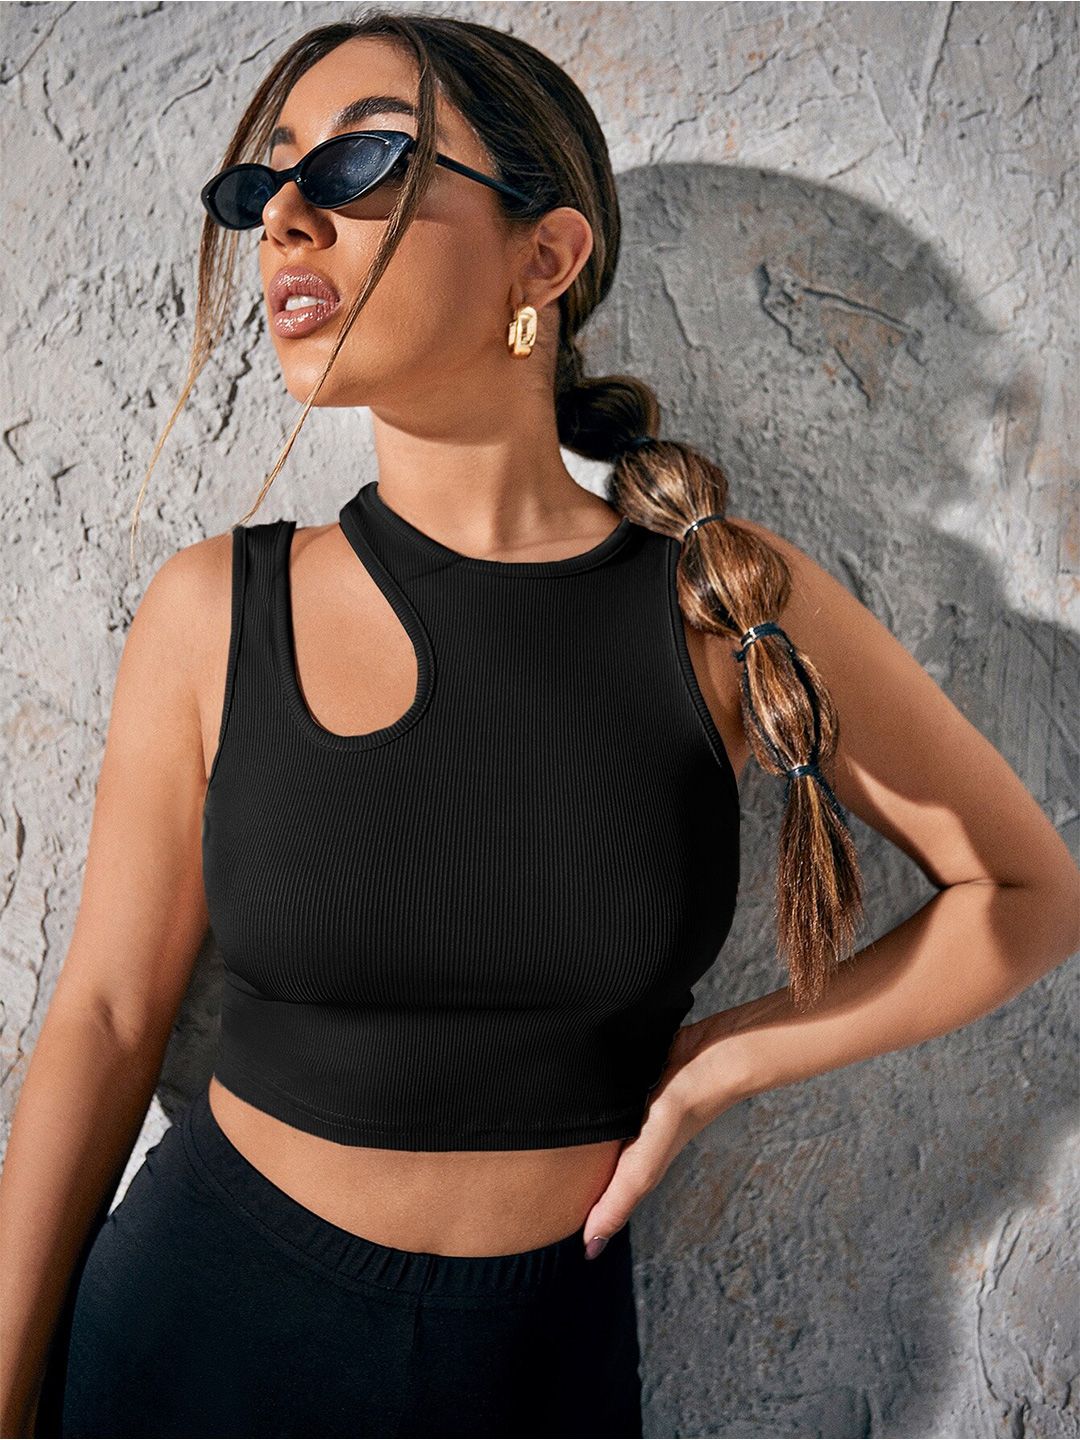 AAHWAN Black Cut-out Neck Fitted Crop Top Price in India